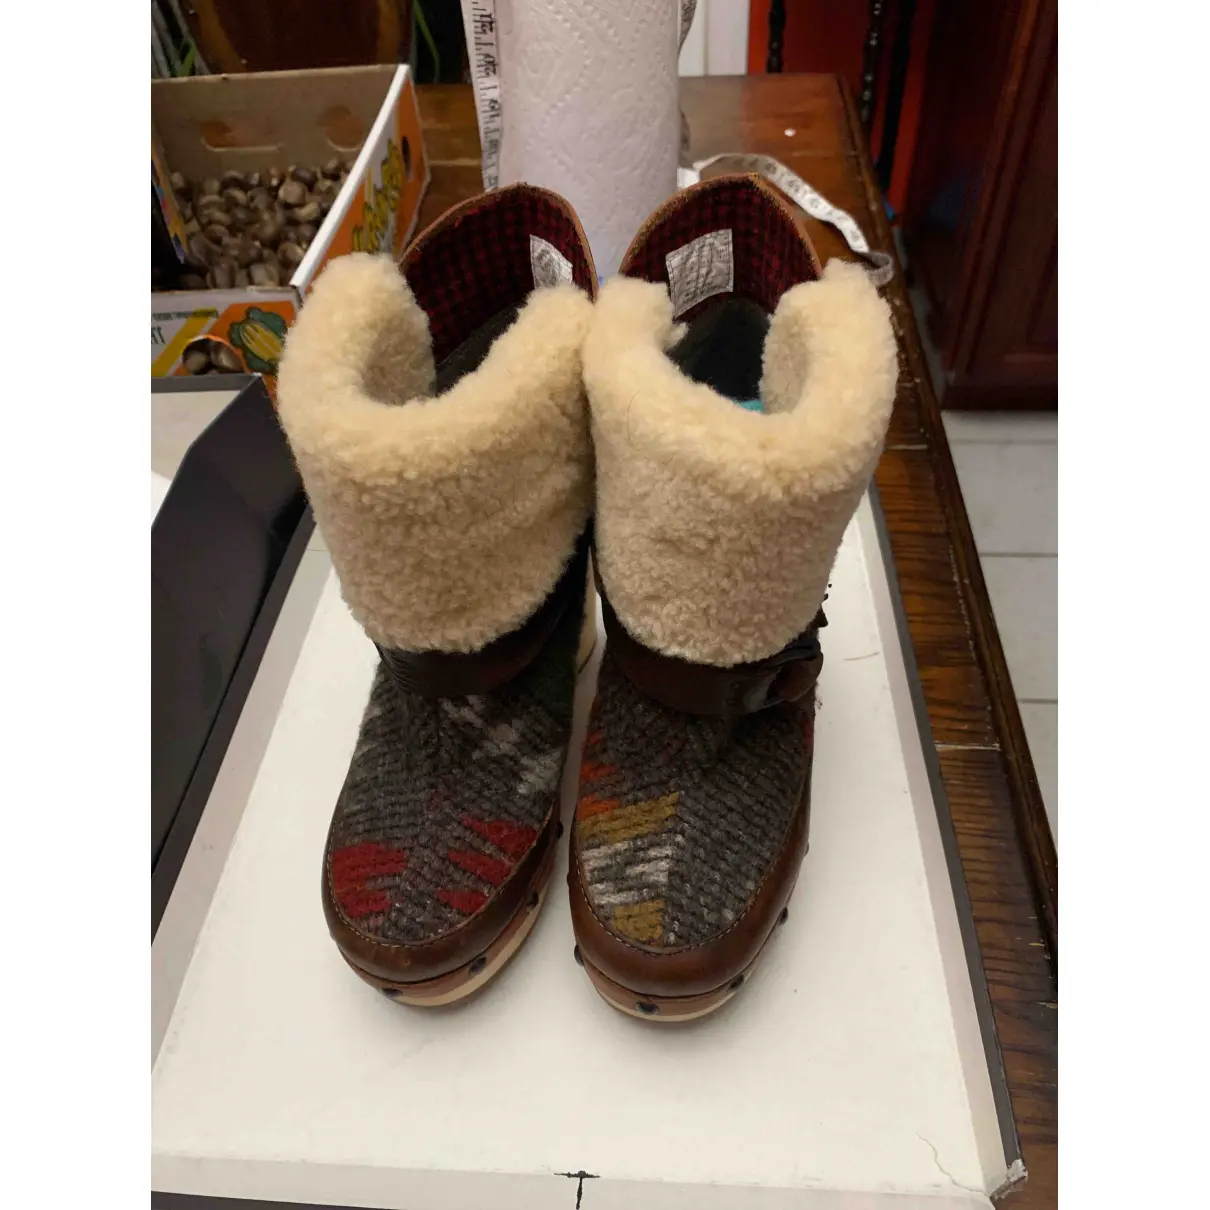 Buy Woolrich Cloth boots online